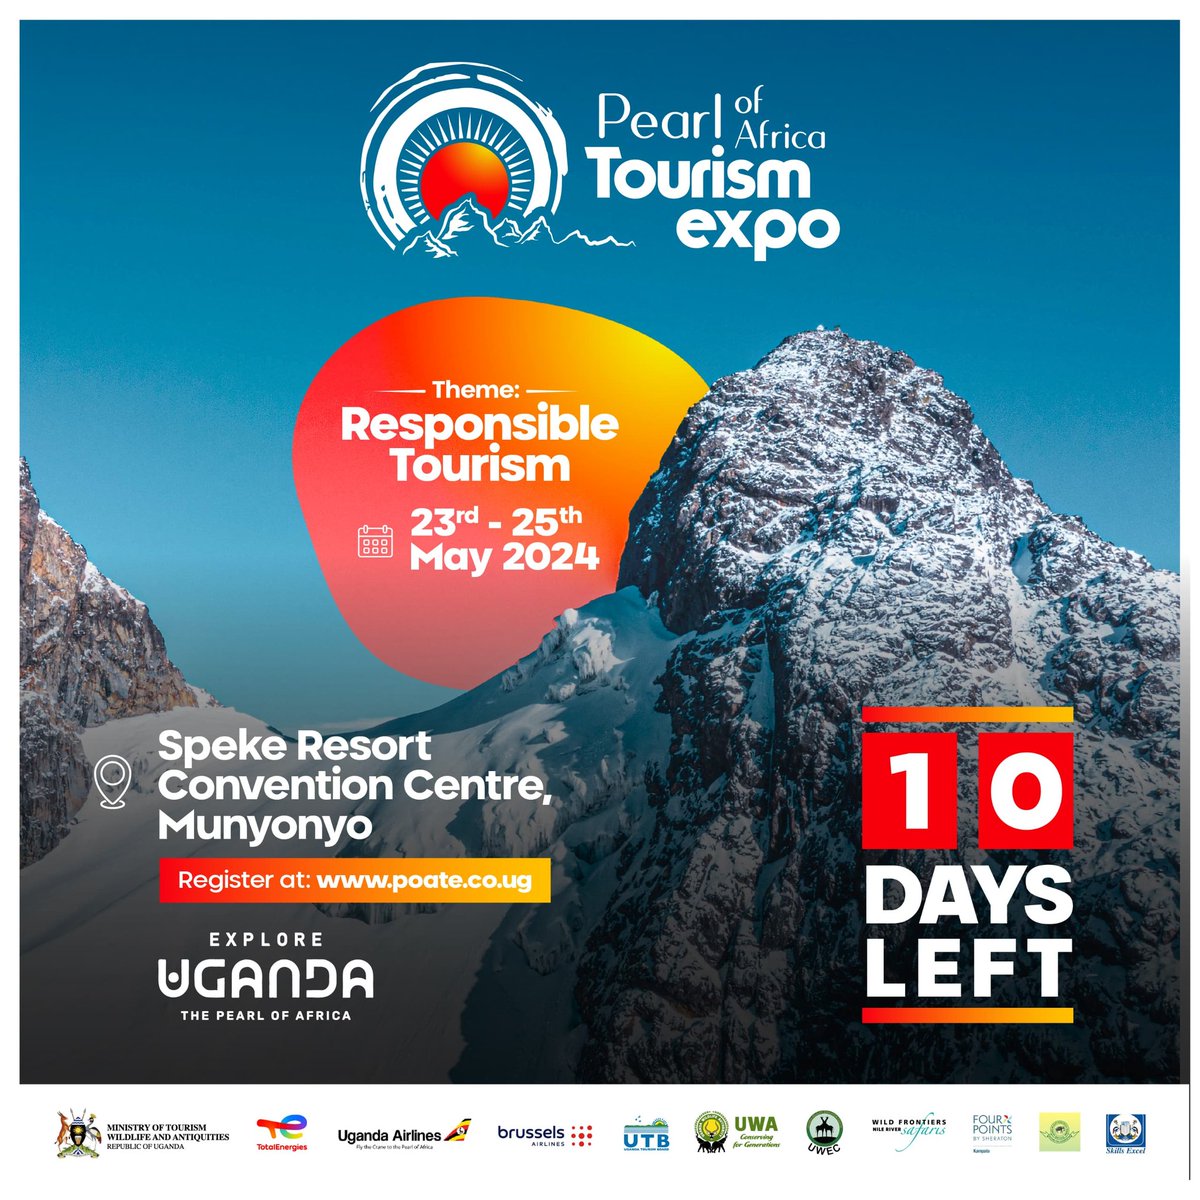 Reconnecting with clients,suppliers,partners plus showcasing destination Uganda,new tourism products & itineraries is top of the Sectors agenda as we get closer to hosting the biggest 8th #POATE2024 Expo @spekeresort from 23rd-25th May 2024. @mugarra @ExploreUganda @LillyAjarova